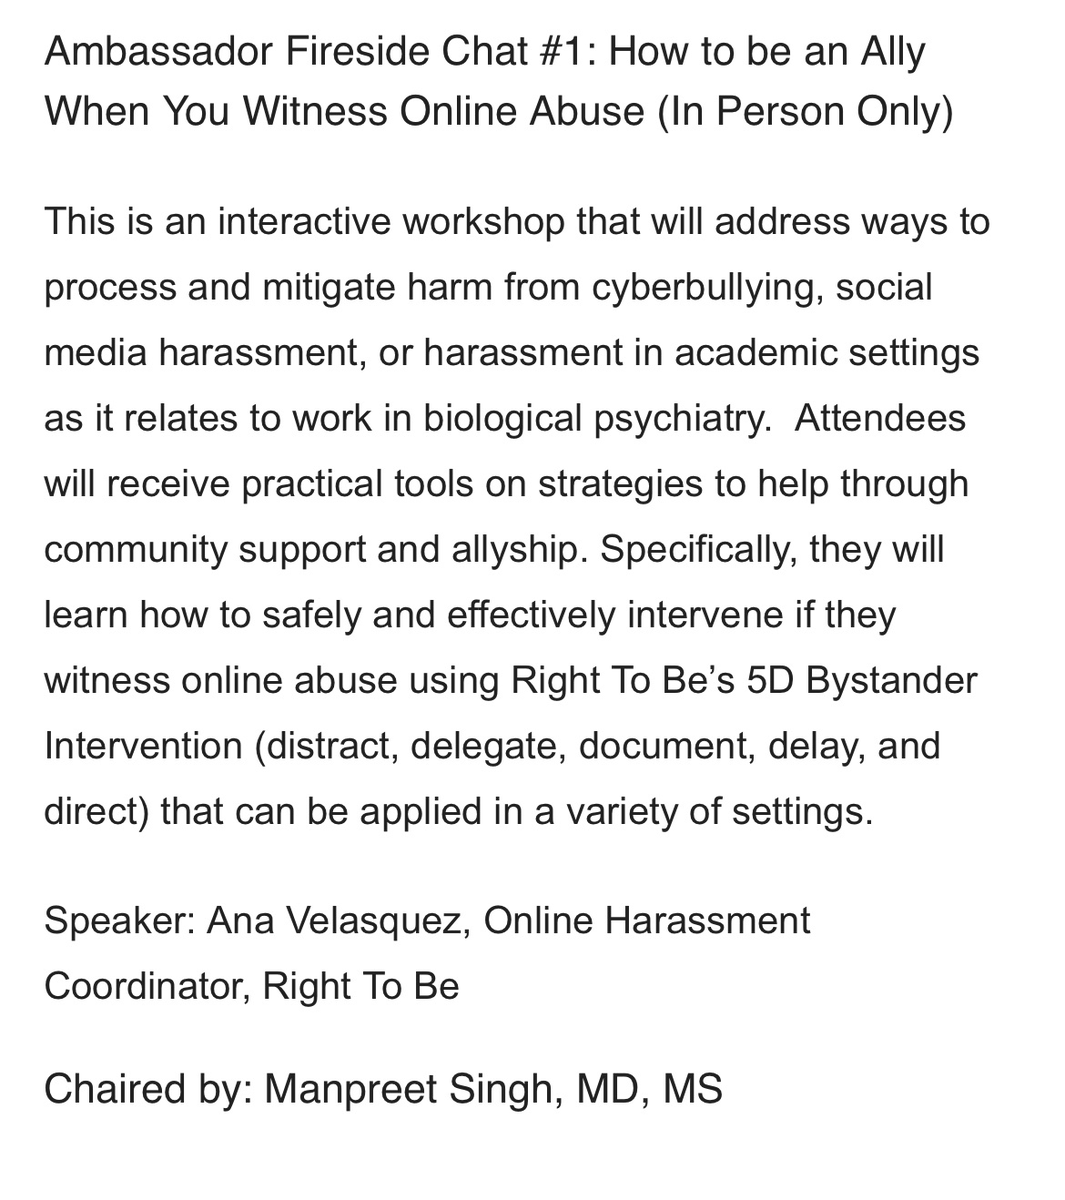 Join us today at 11:30 AM in AQUA EF for an Ambassador fireside chat “How to be an Ally When You Witness Online Abuse” @doctorhopemd @pshrink #SOBP2023